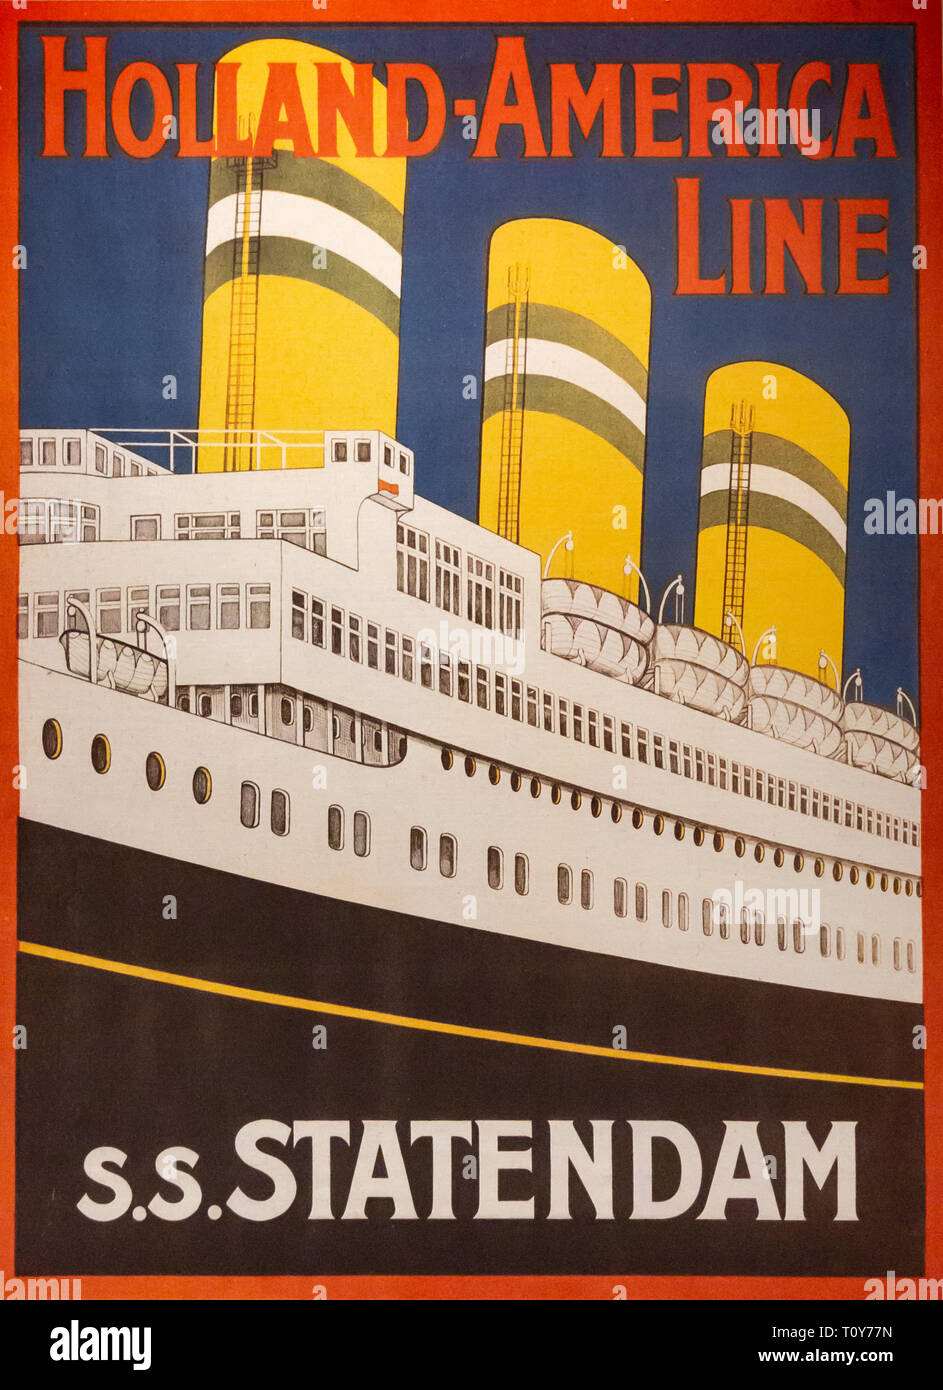 A travel poster for the Holland-America Line SS Statedam on the wall of the Immigration Museum on Ellis Island in New York City. Stock Photo